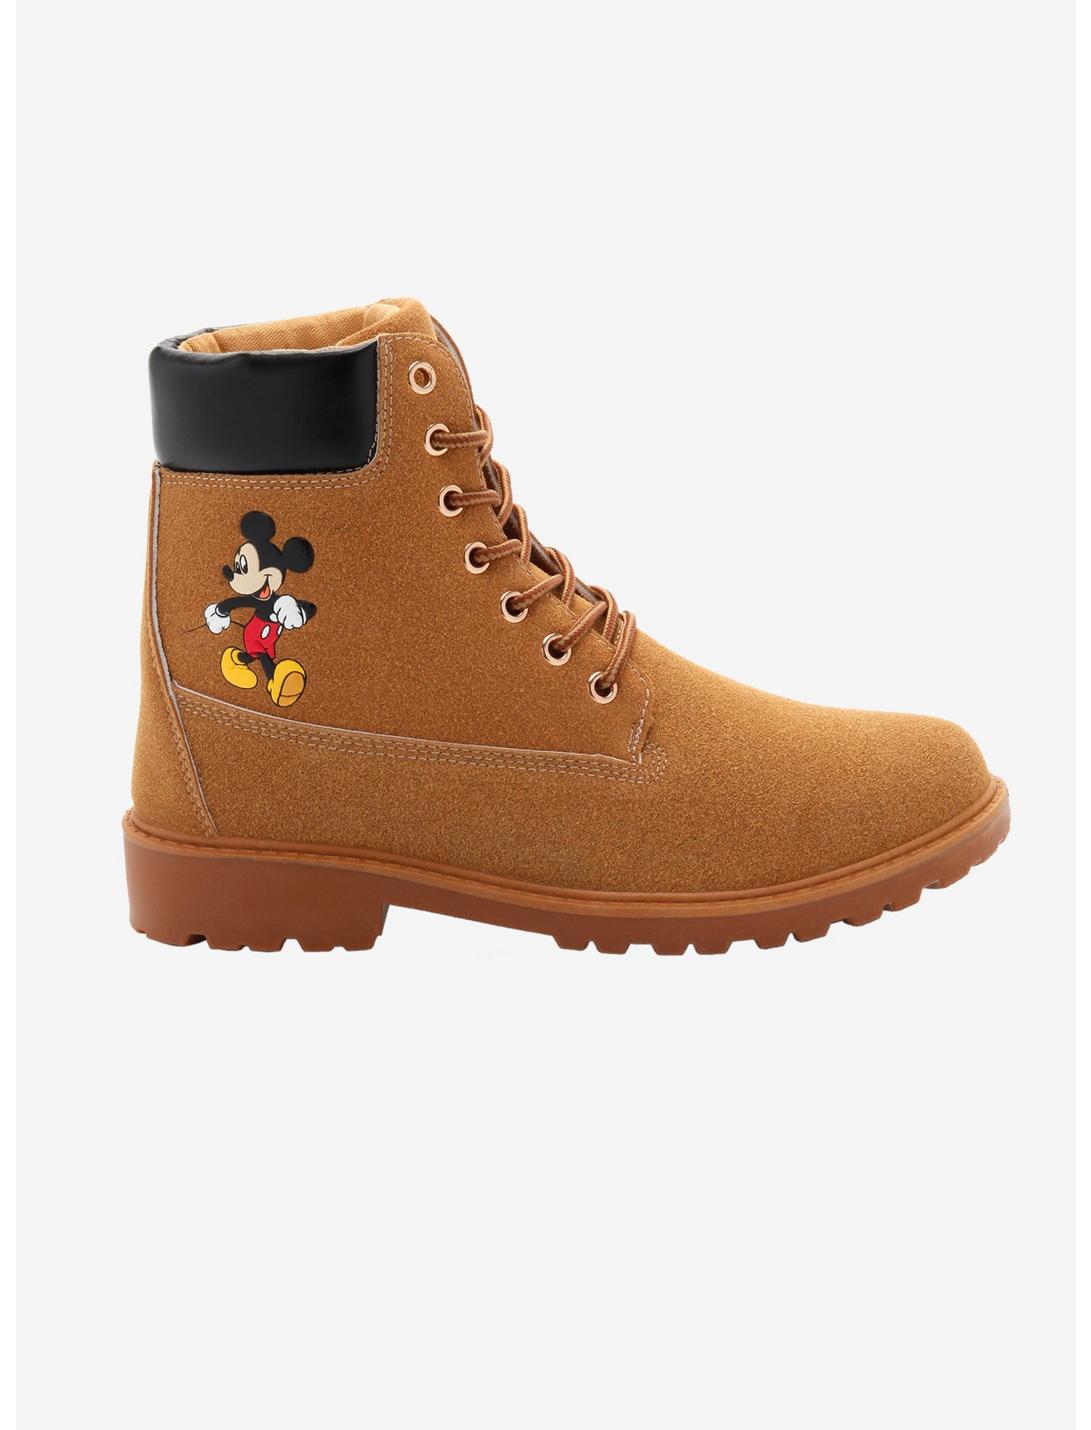 Disney Mickey Mouse Lace-Up Boots, MULTI, hi-res